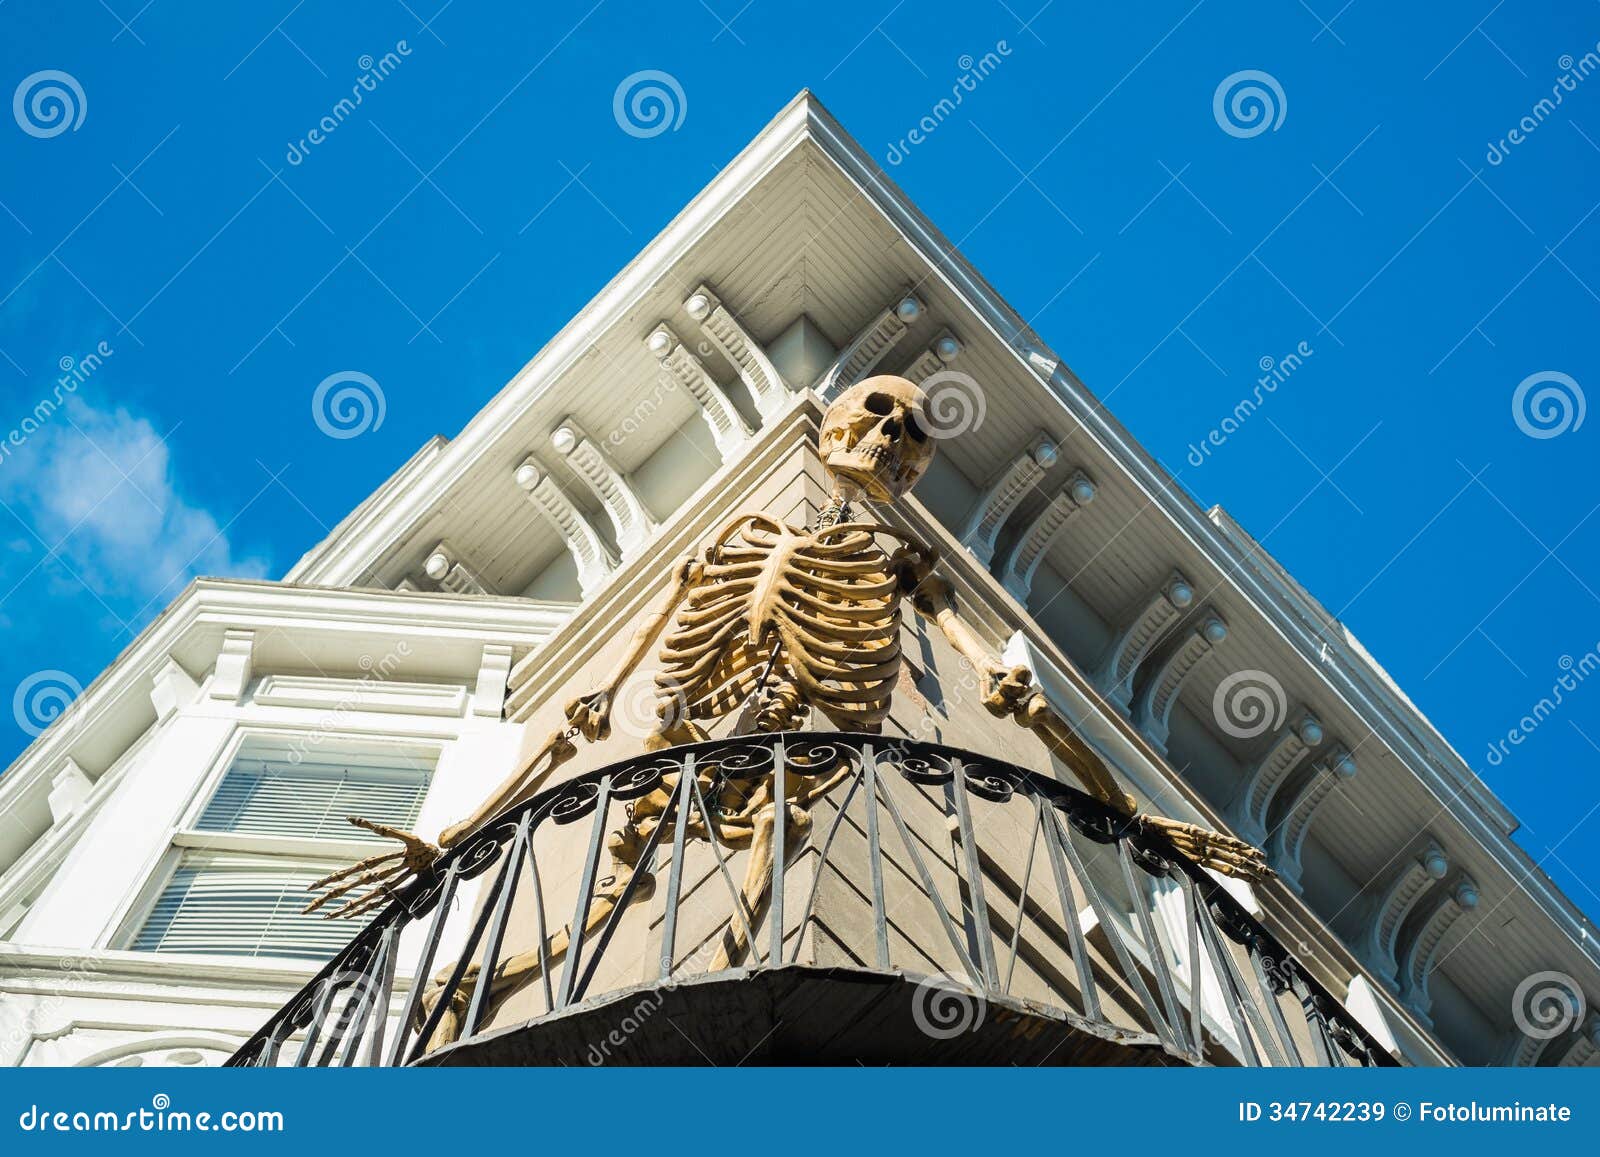 Halloween in Charleston stock image. Image of attraction 34742239